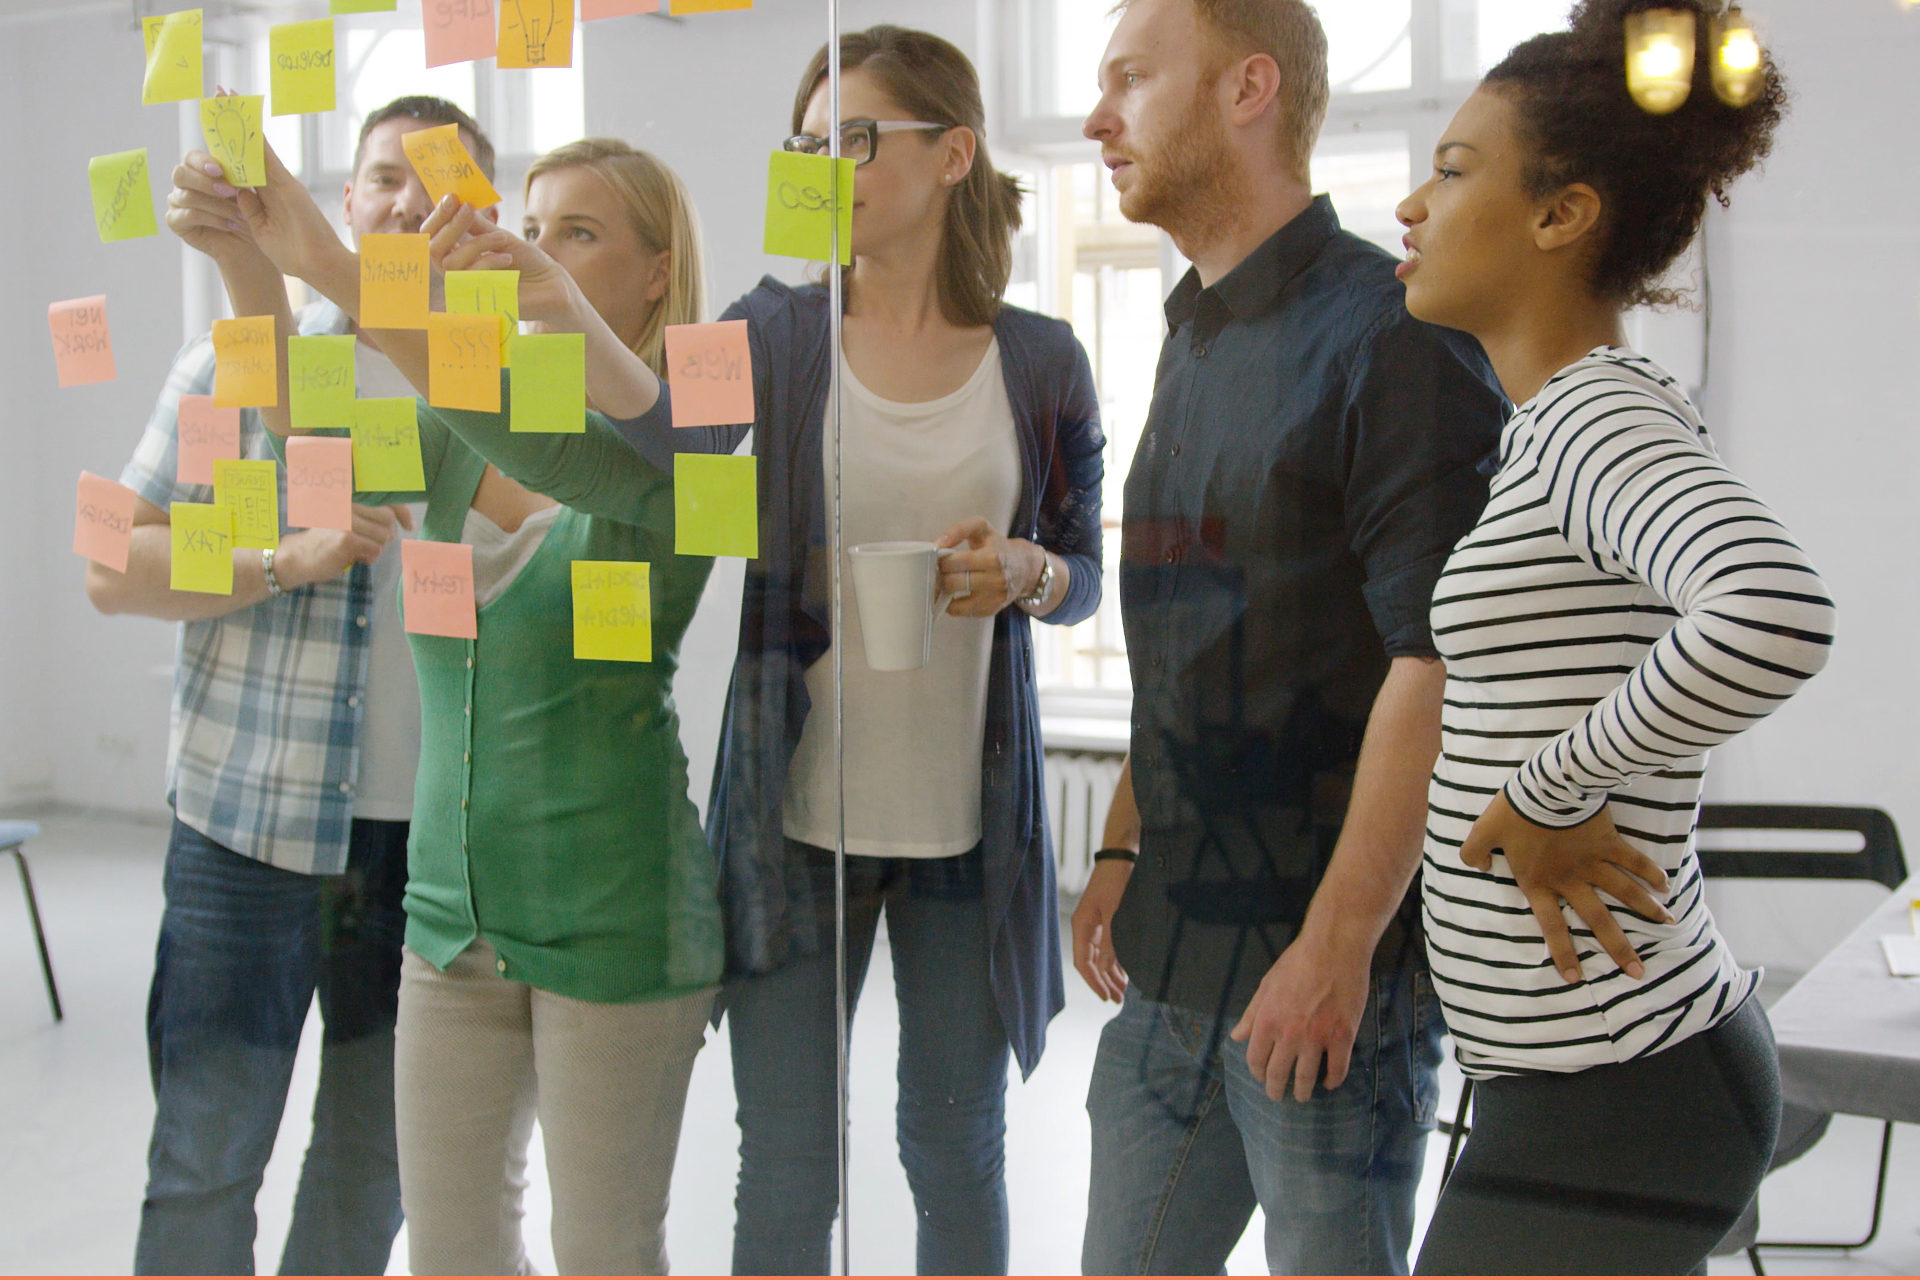 A group of people reviewing lots of ideas on sticky notes stuck to a wall.